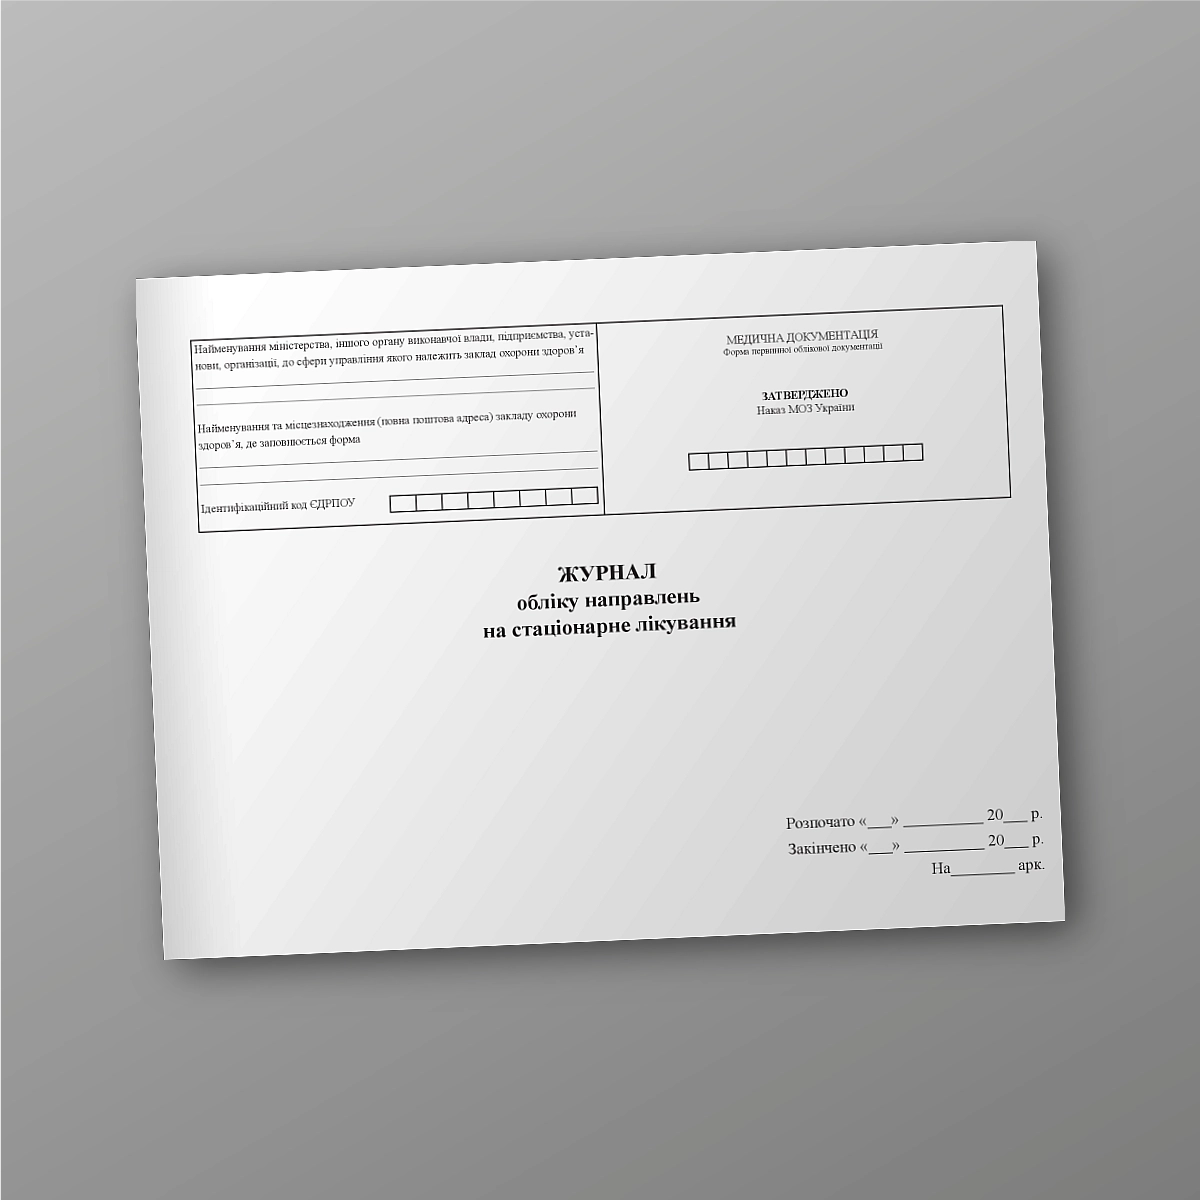 Logbook of referrals for inpatient treatment | PrintTo: